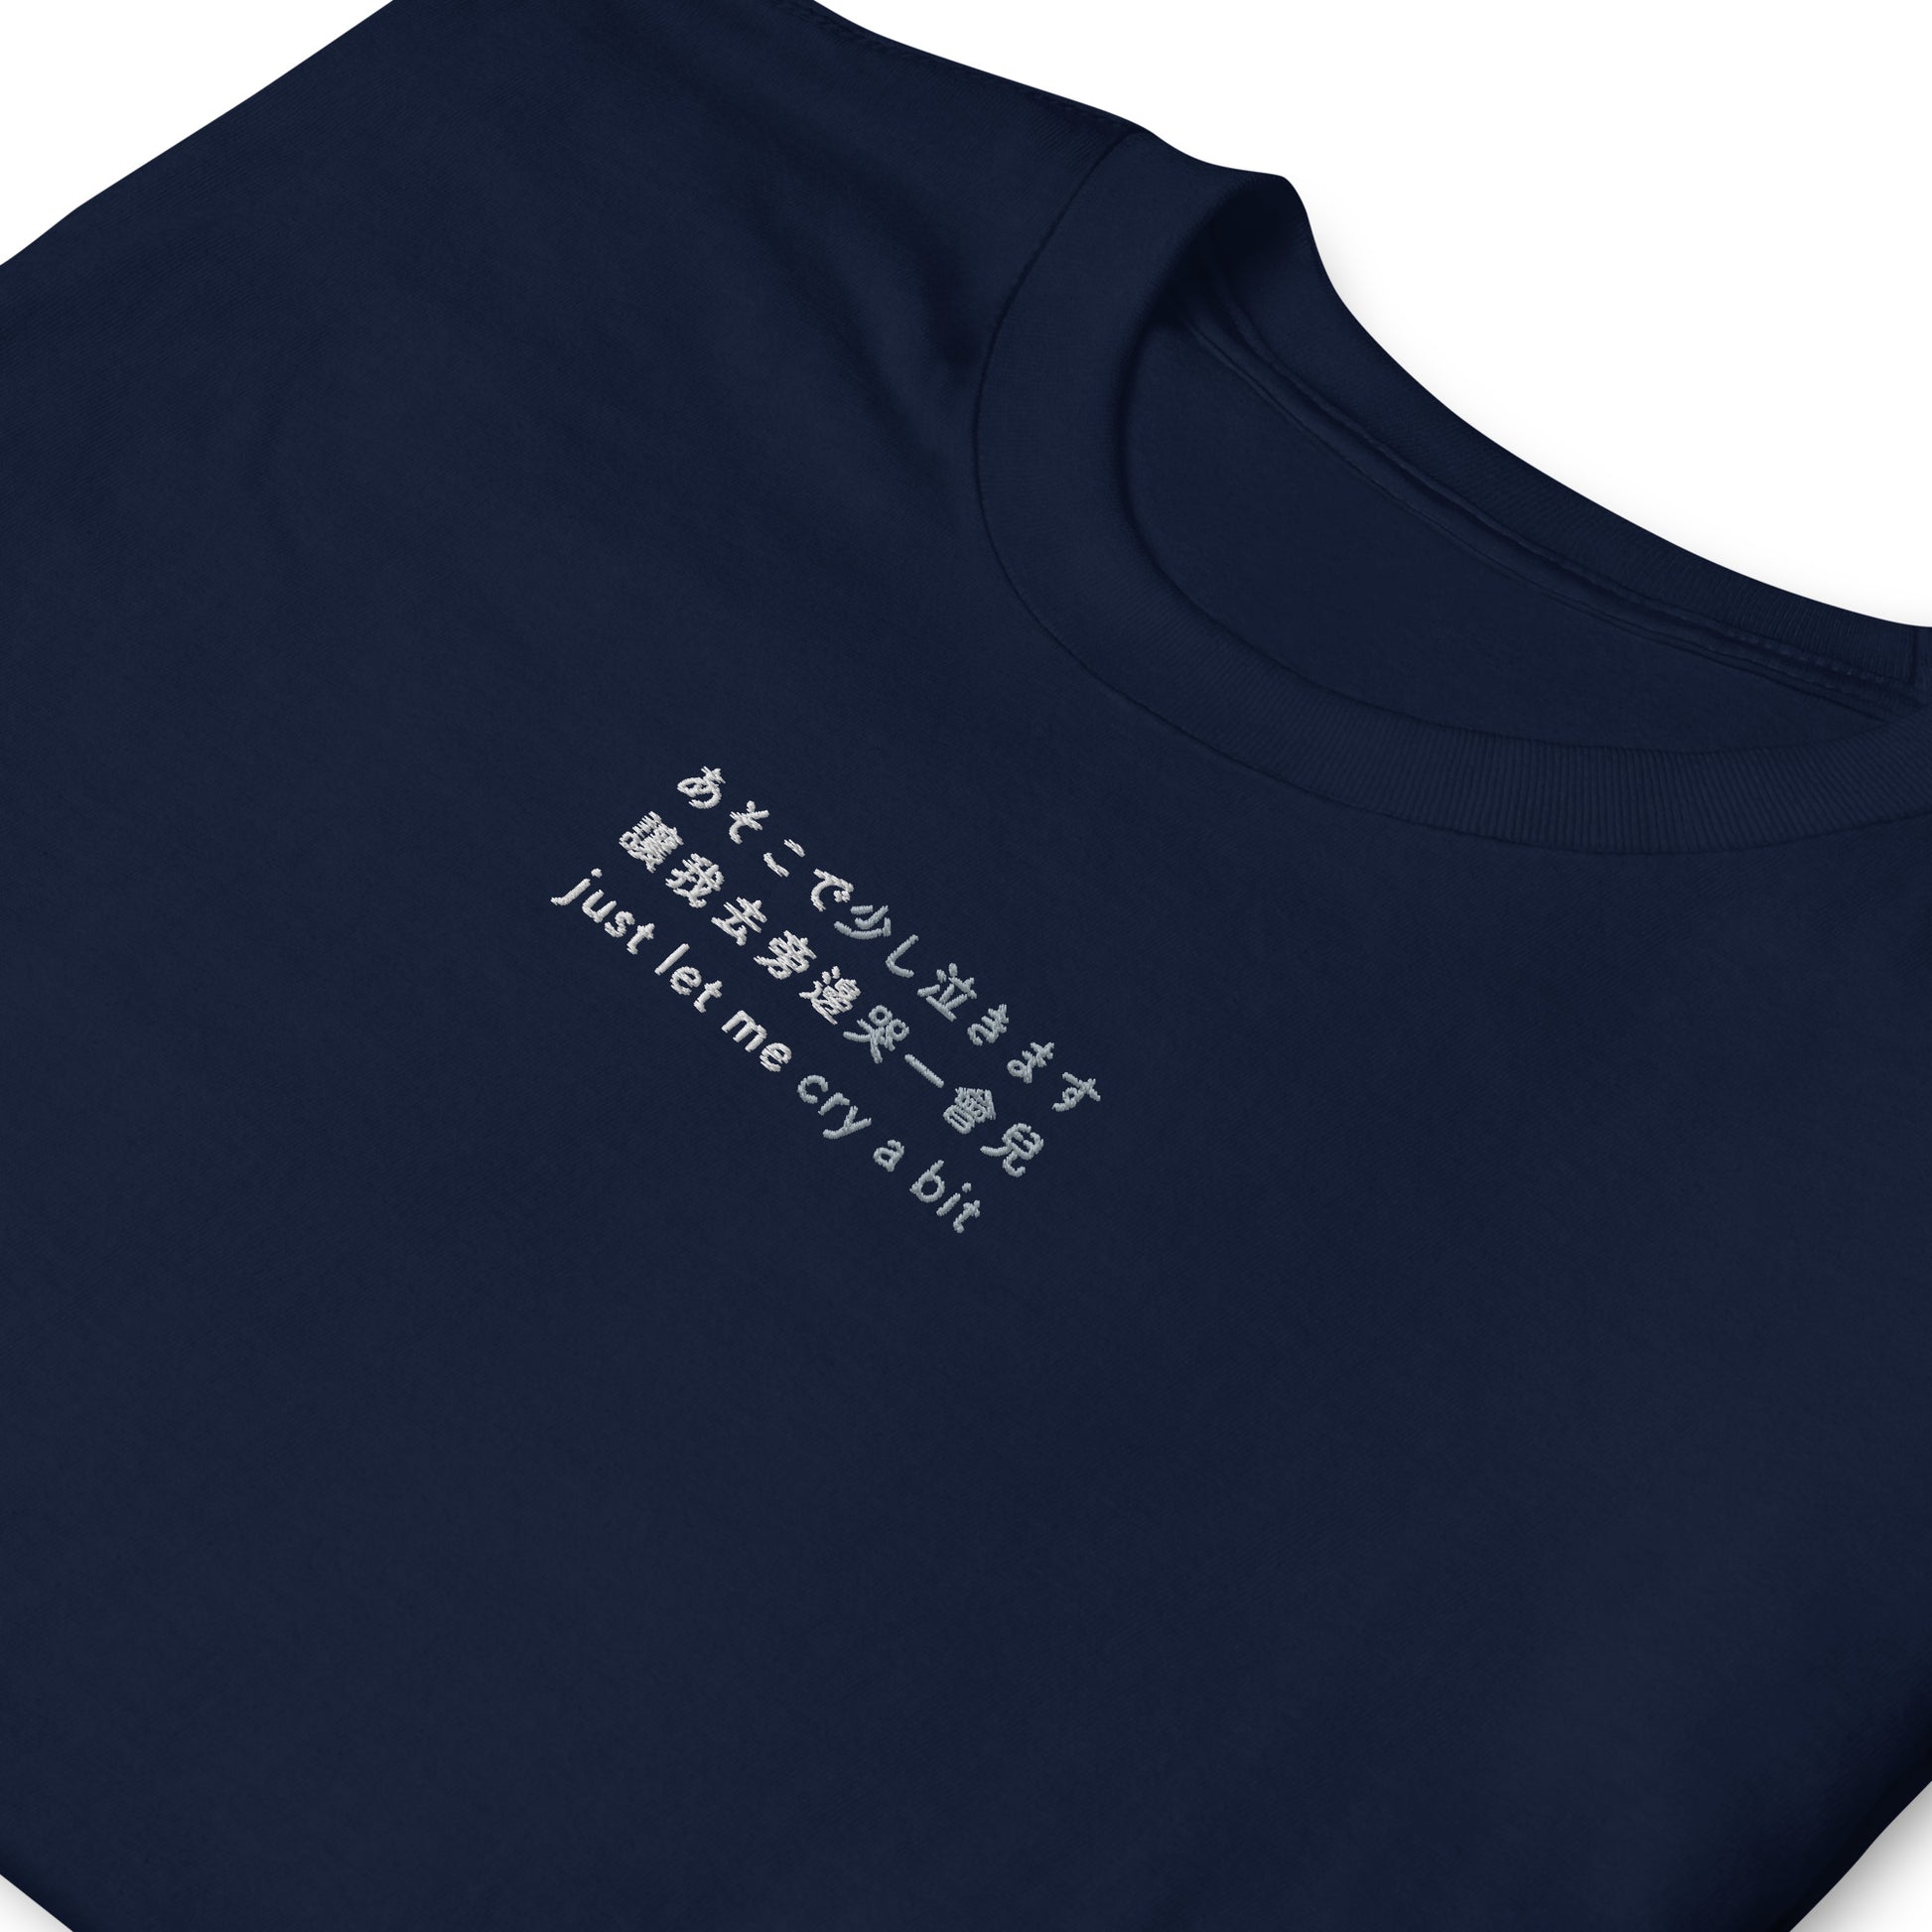 Navy High Quality Tee - Front Design with an White,Light Gray Embroidery "Just Let Me Cry A Bit" in Japanese,Chinese and English